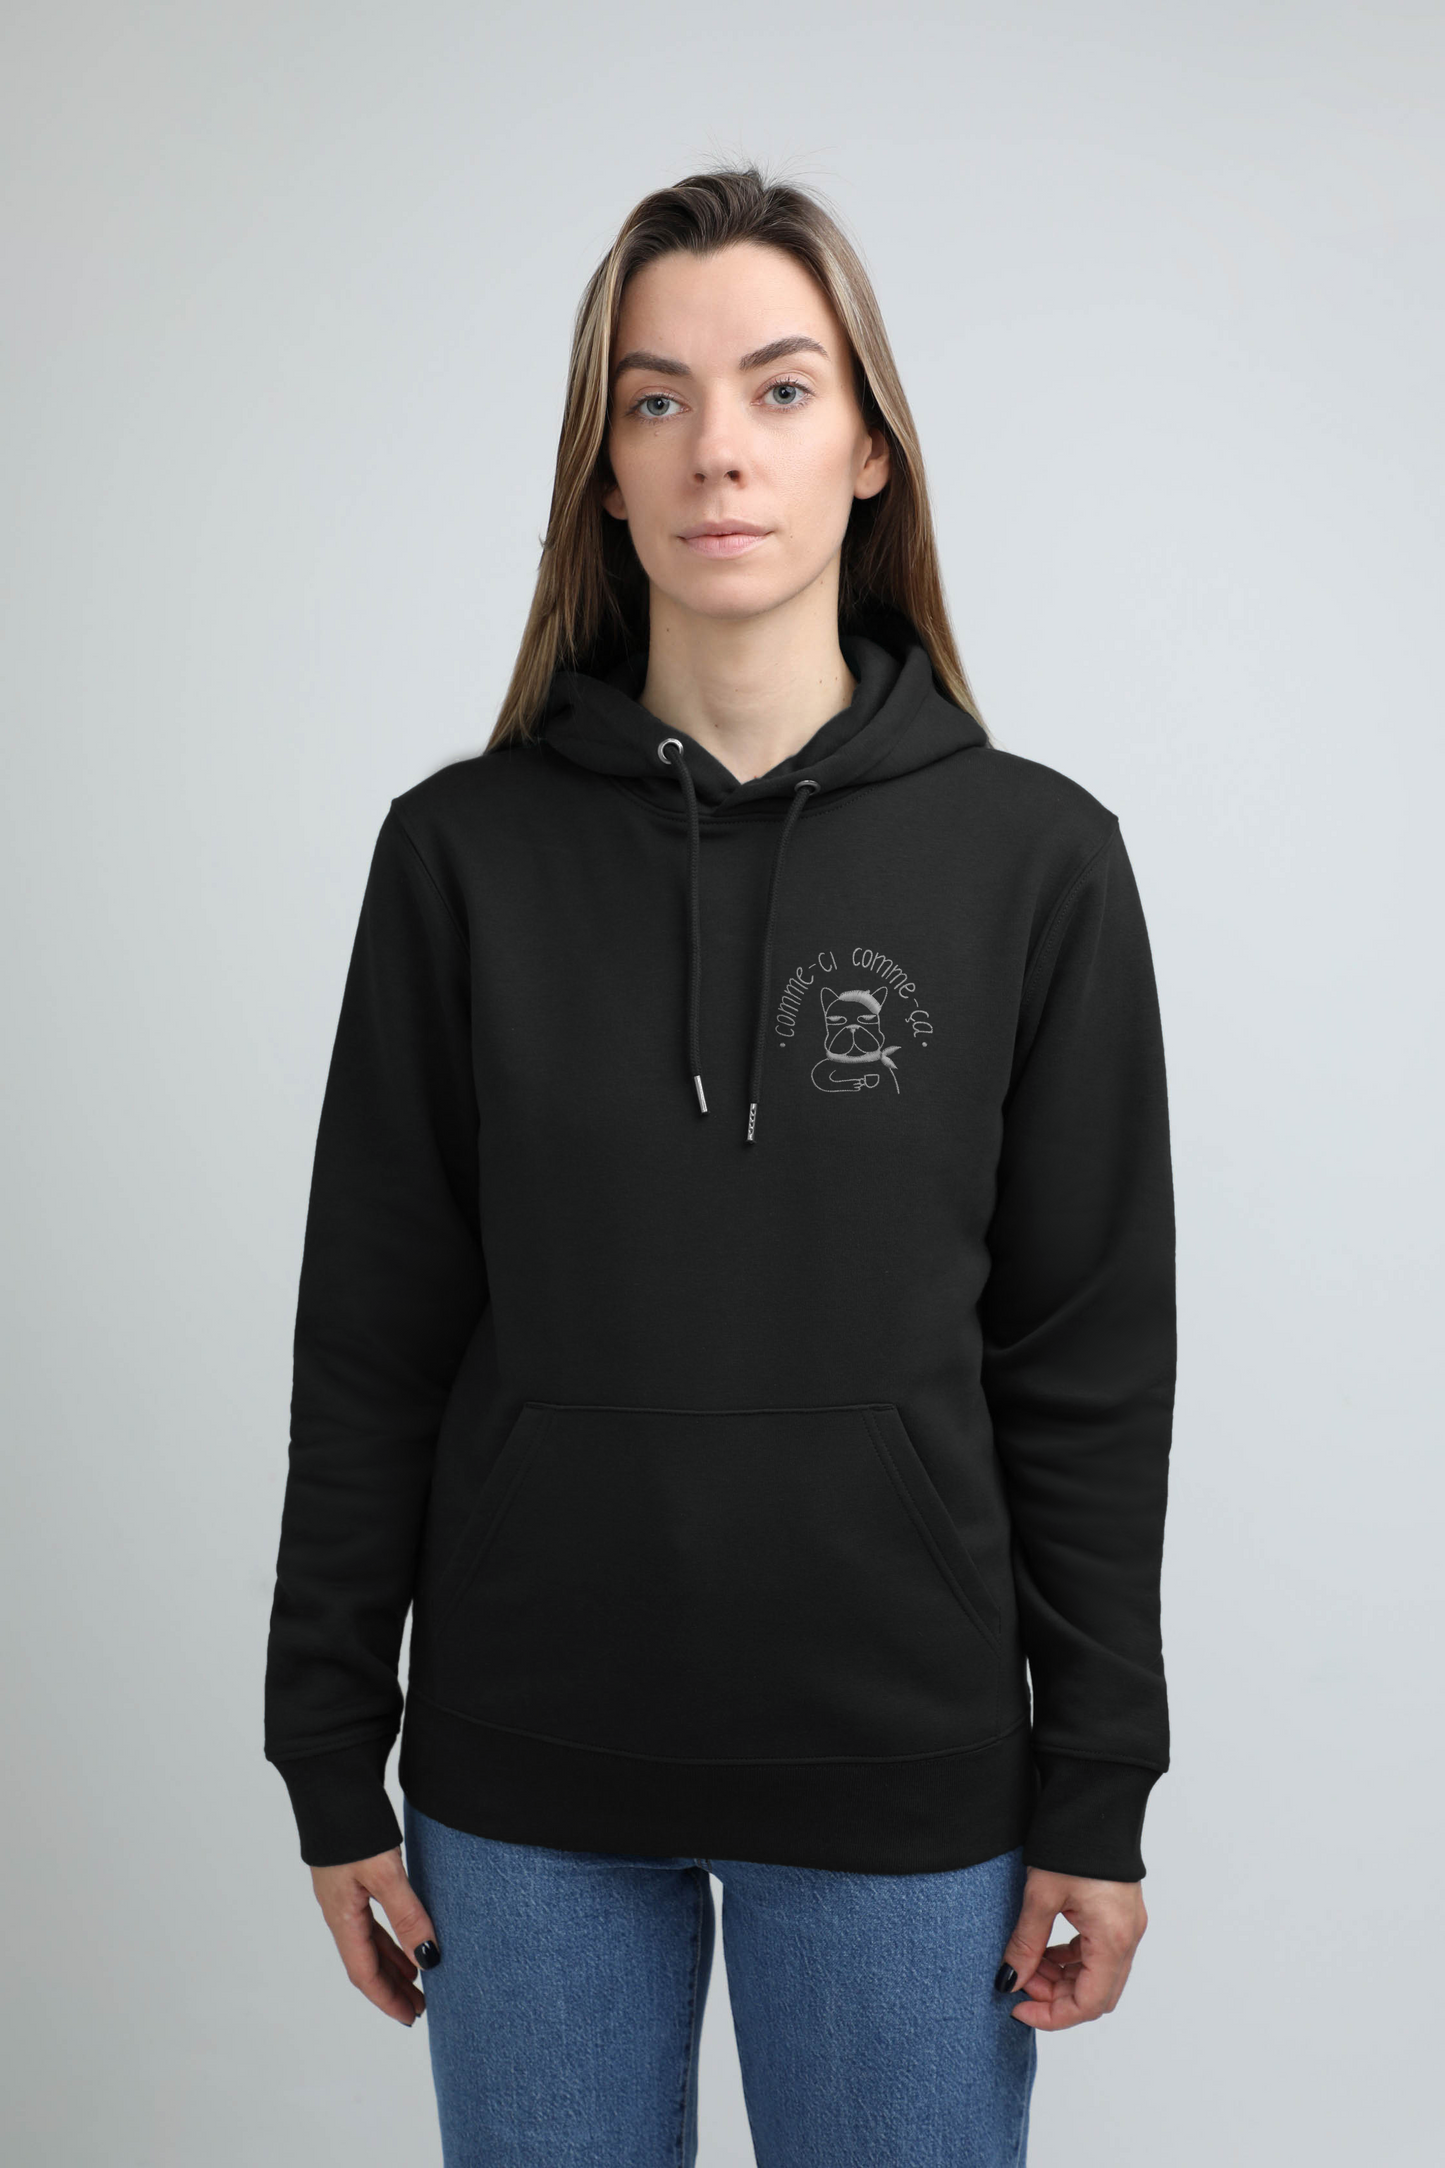 Comme ci comme ca | Hoodie with embroidered dog. Regular fit | Unisex by My Wild Other